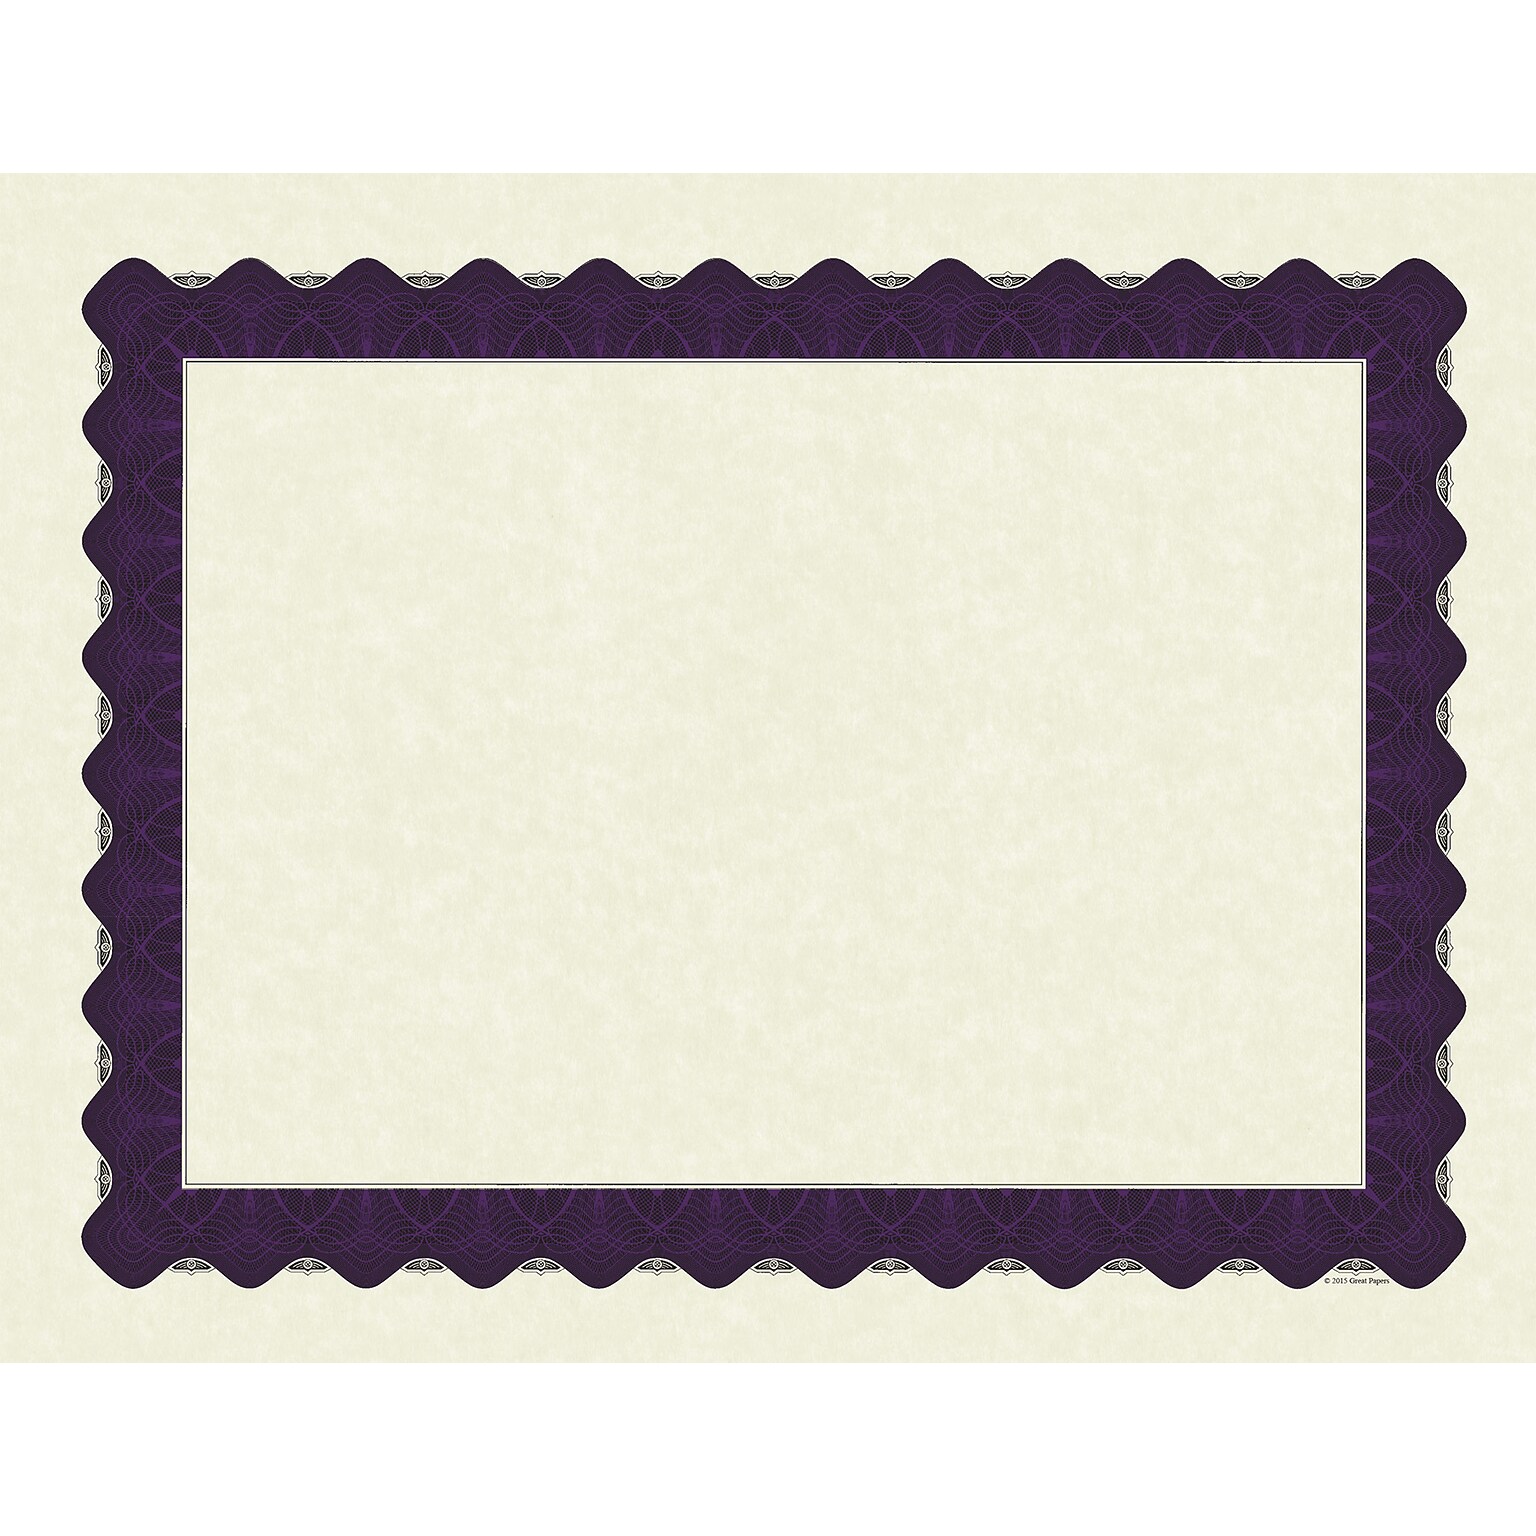 Great Papers Certificates, 8.5 x 11, Beige and Matte Purple, 100/Pack (961021)